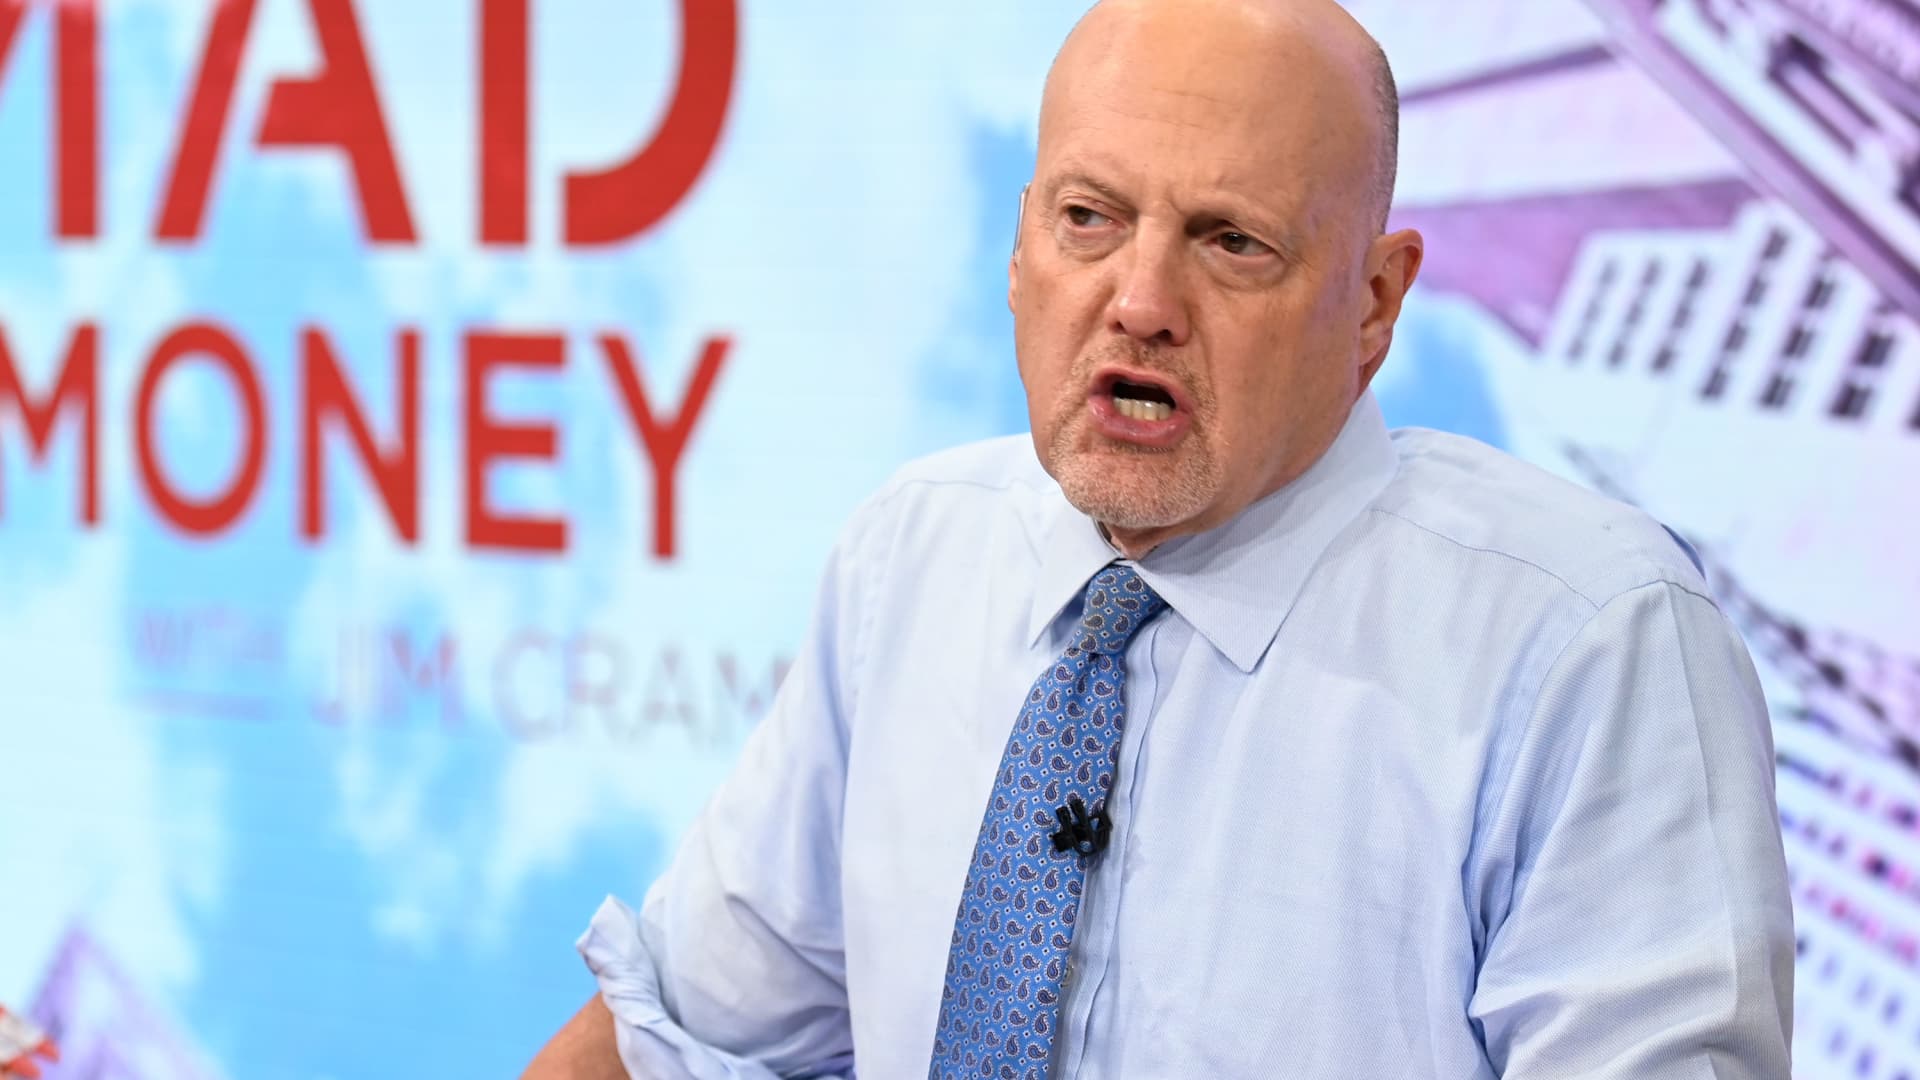 With retail firms reporting user weakness, Cramer says stick with tech